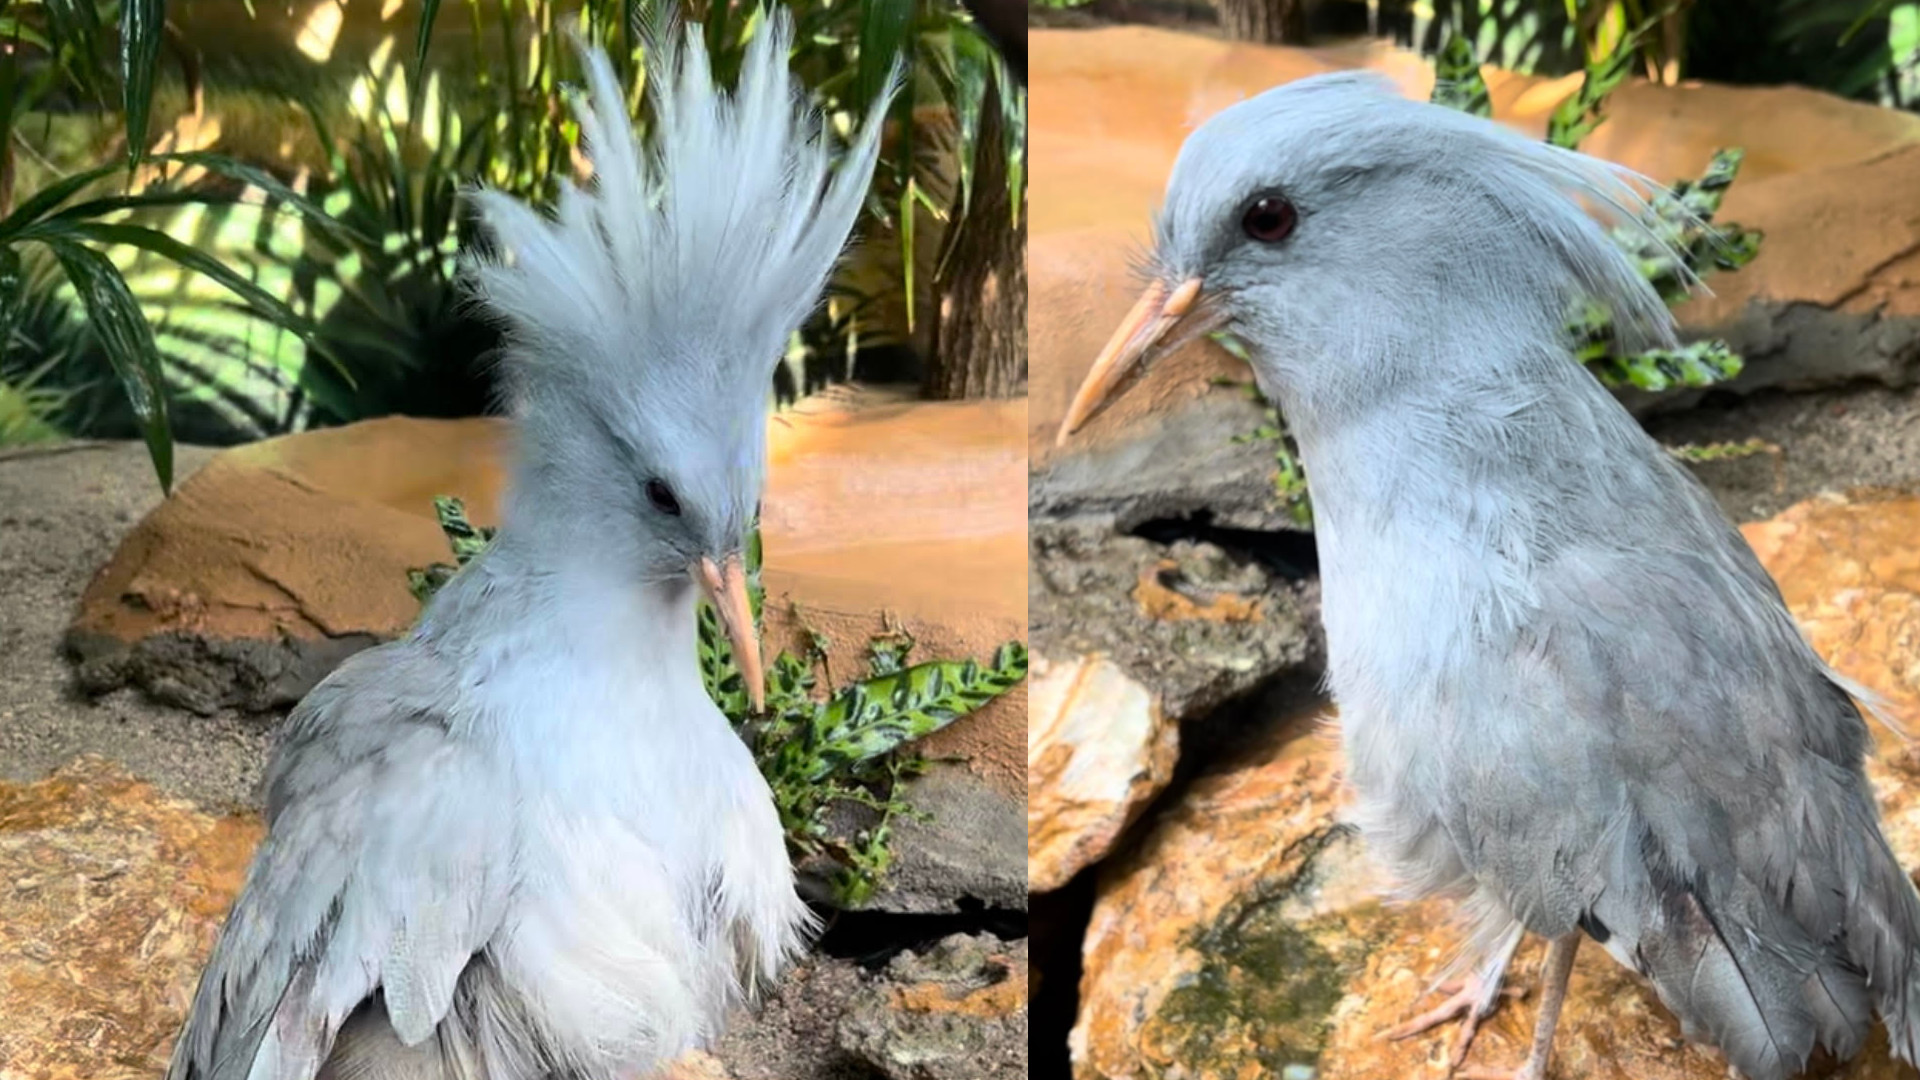 Two side-by-side images of a white-feathered bird with a yellow beak. In the left image, the crest on his head stands tall. Rocky background.